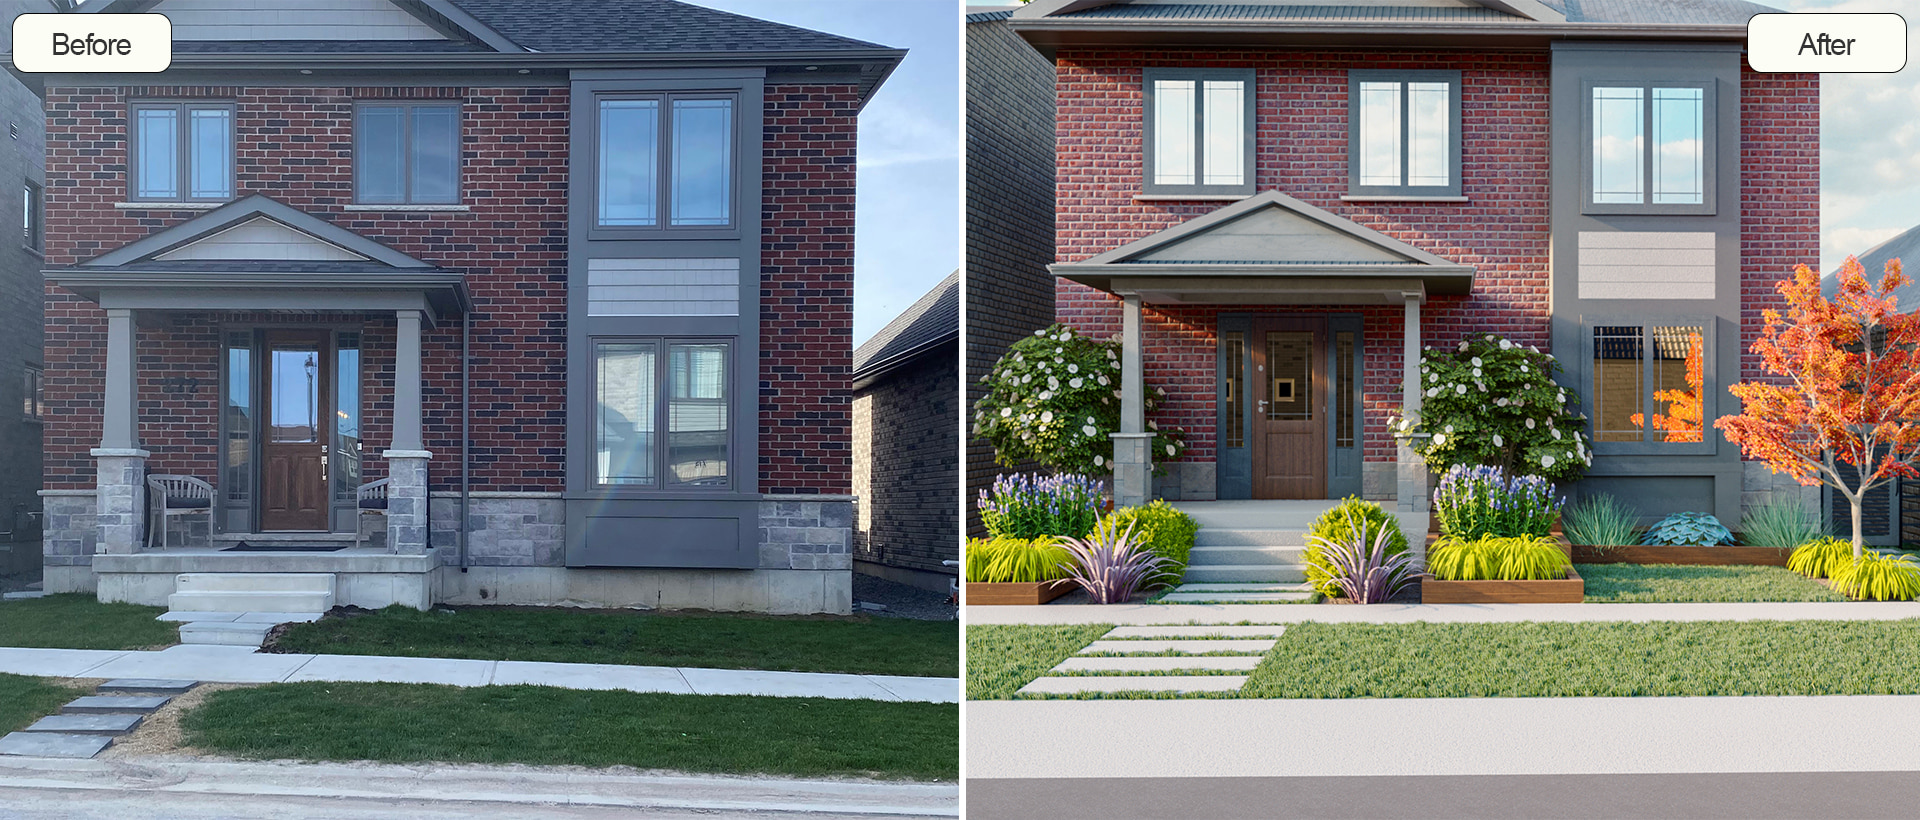 Comparison of a home's front exterior before and after landscaping, showcasing new planting beds with a variety of shrubs and perennials